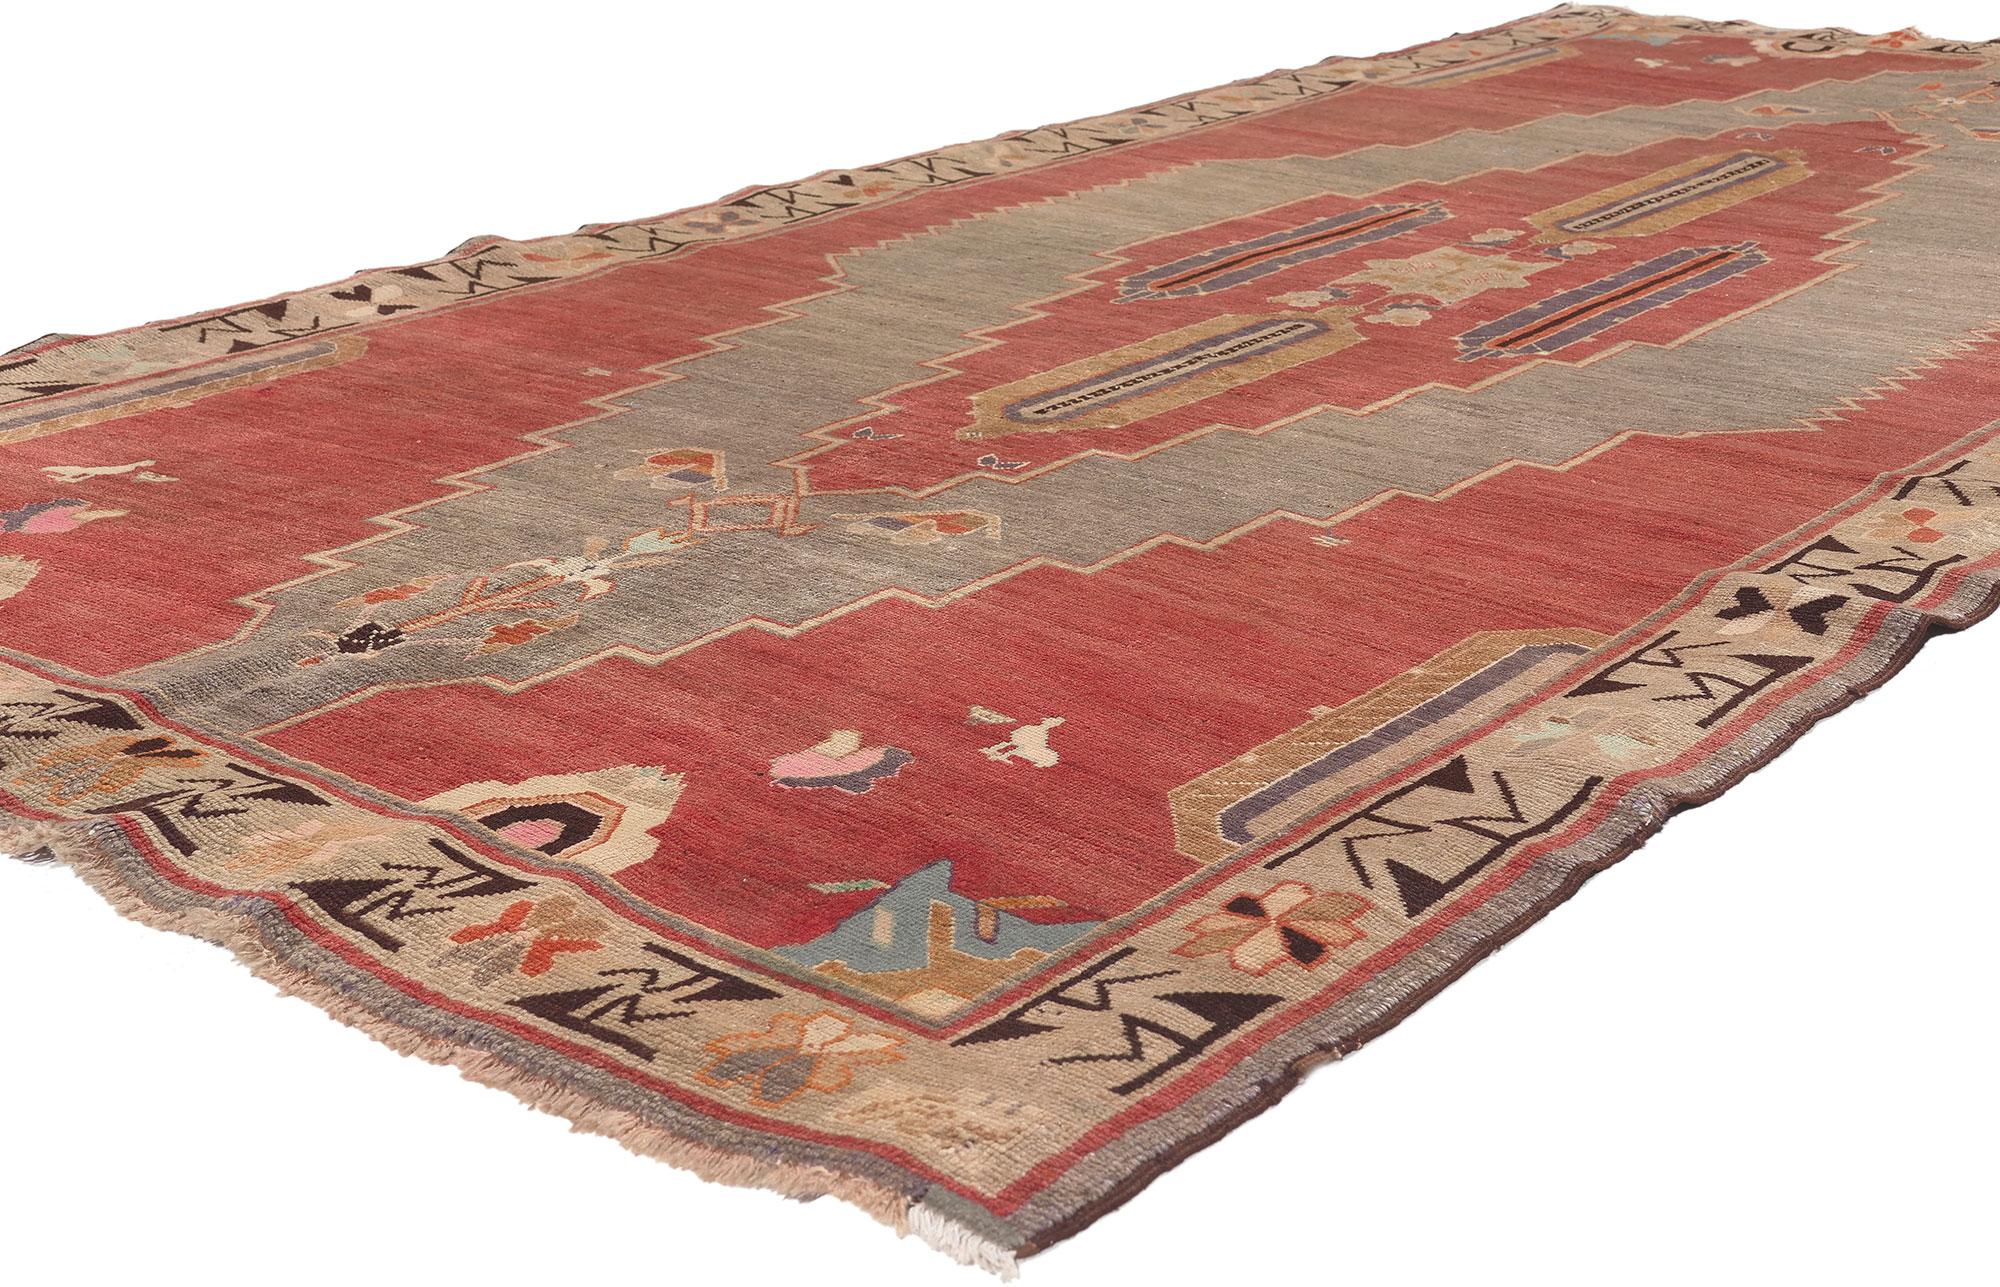 71807 Antique Caucasian Tribal Rug, 04’09 x 09’08.
Nomadic charm meets masculine appeal in this hand-knotted wool antique Caucasian tribal rug. The intrinsic design and earthy color palette woven into this piece work together creating a modern look.